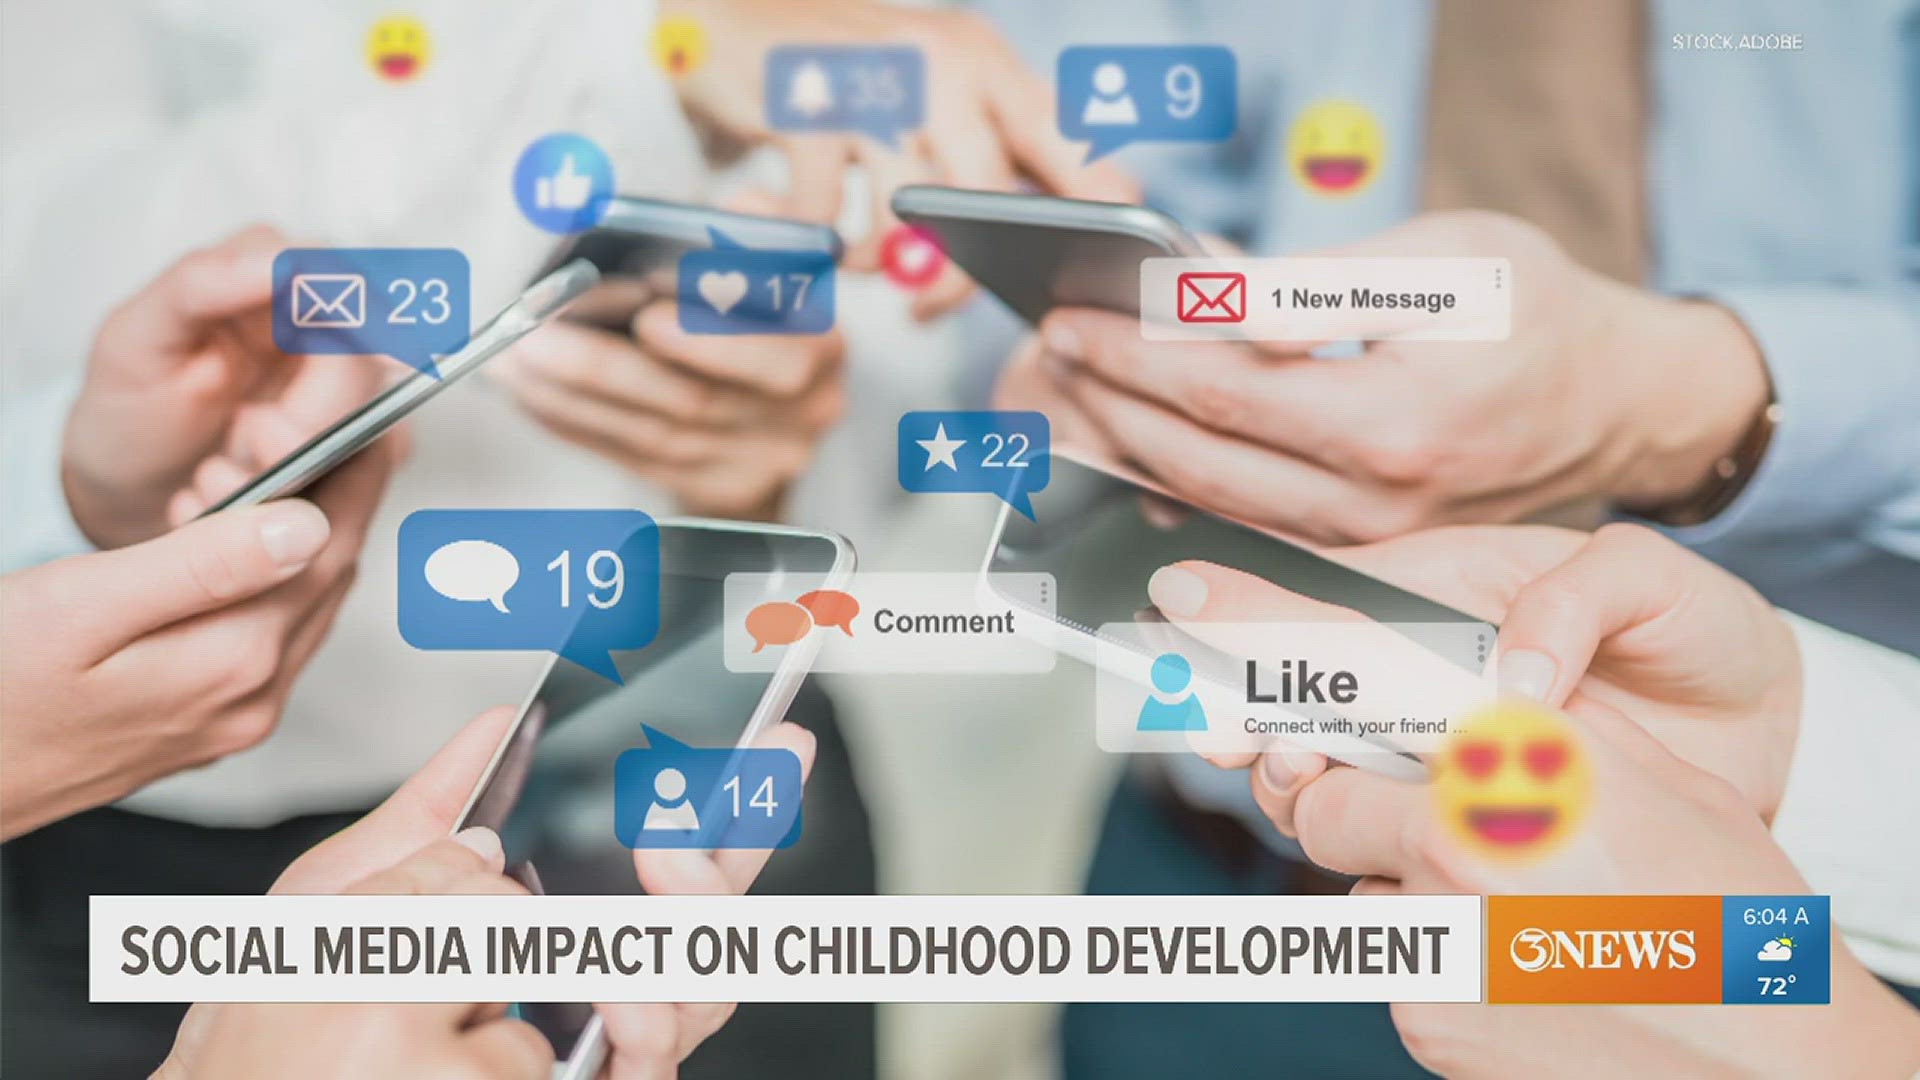 Dr. Salim Surani explained how to address social media usage with your children and what to look out for.